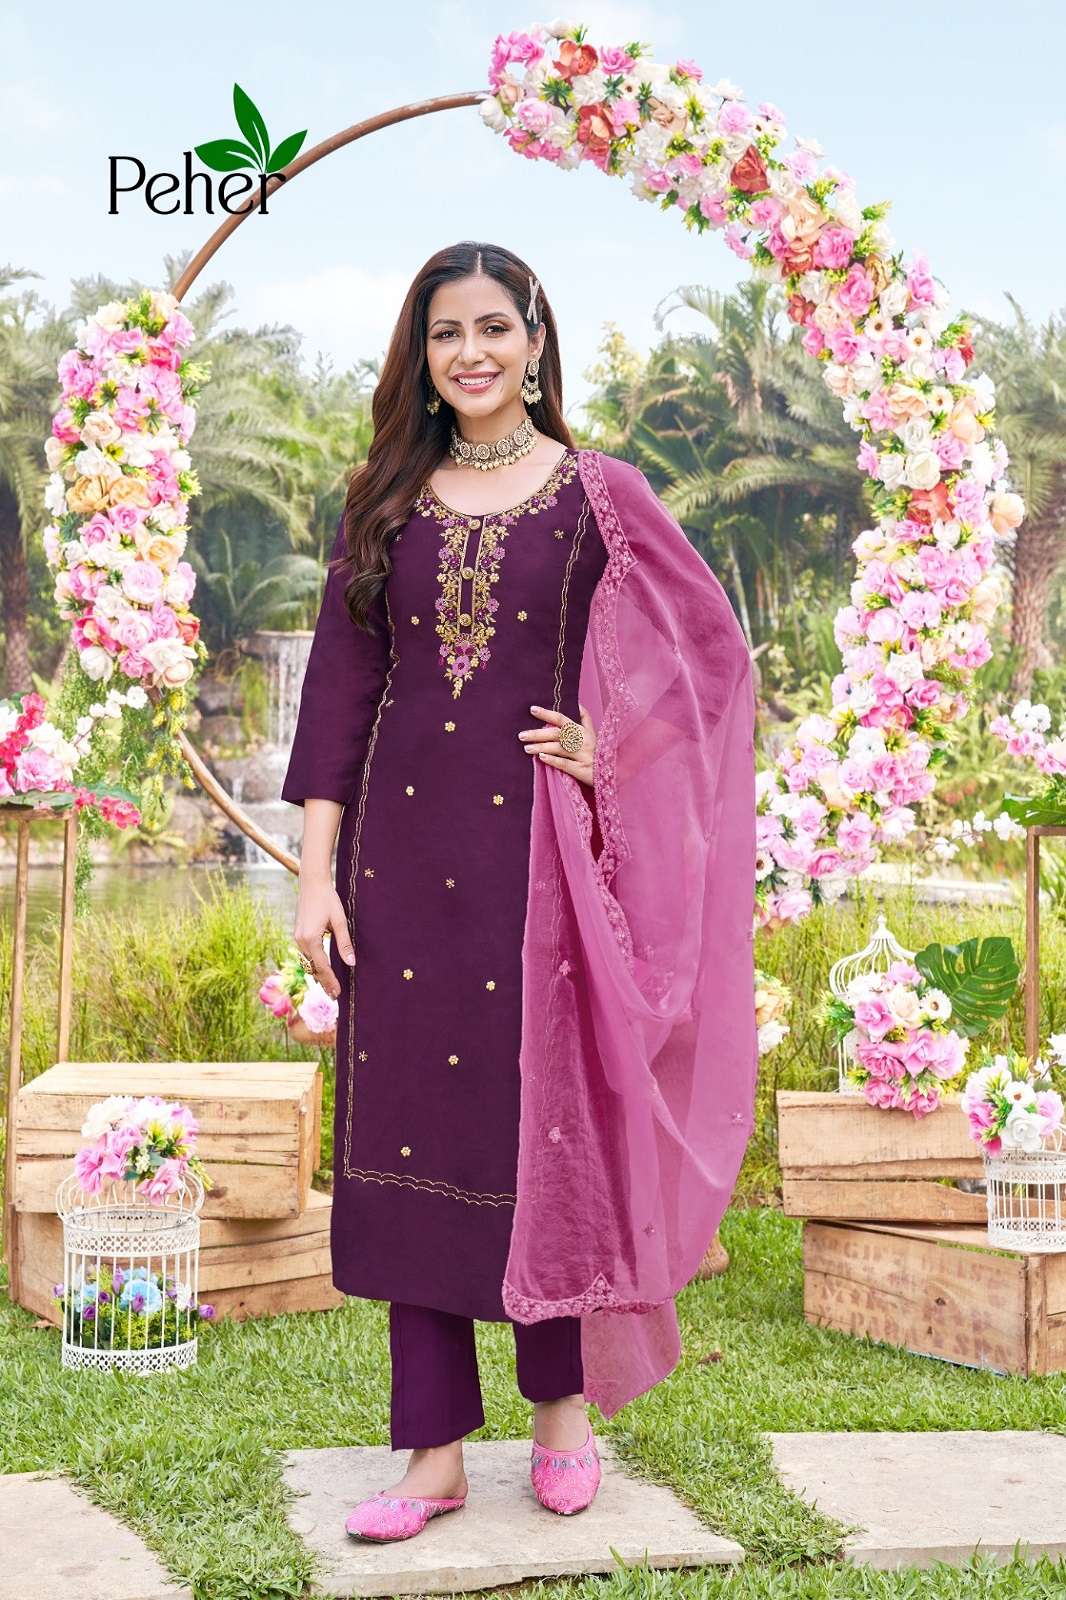 Peher Blossom Vol-3 Ready-To-Wear Formal Wear And Festival Wear Silk Kurti Set Collection